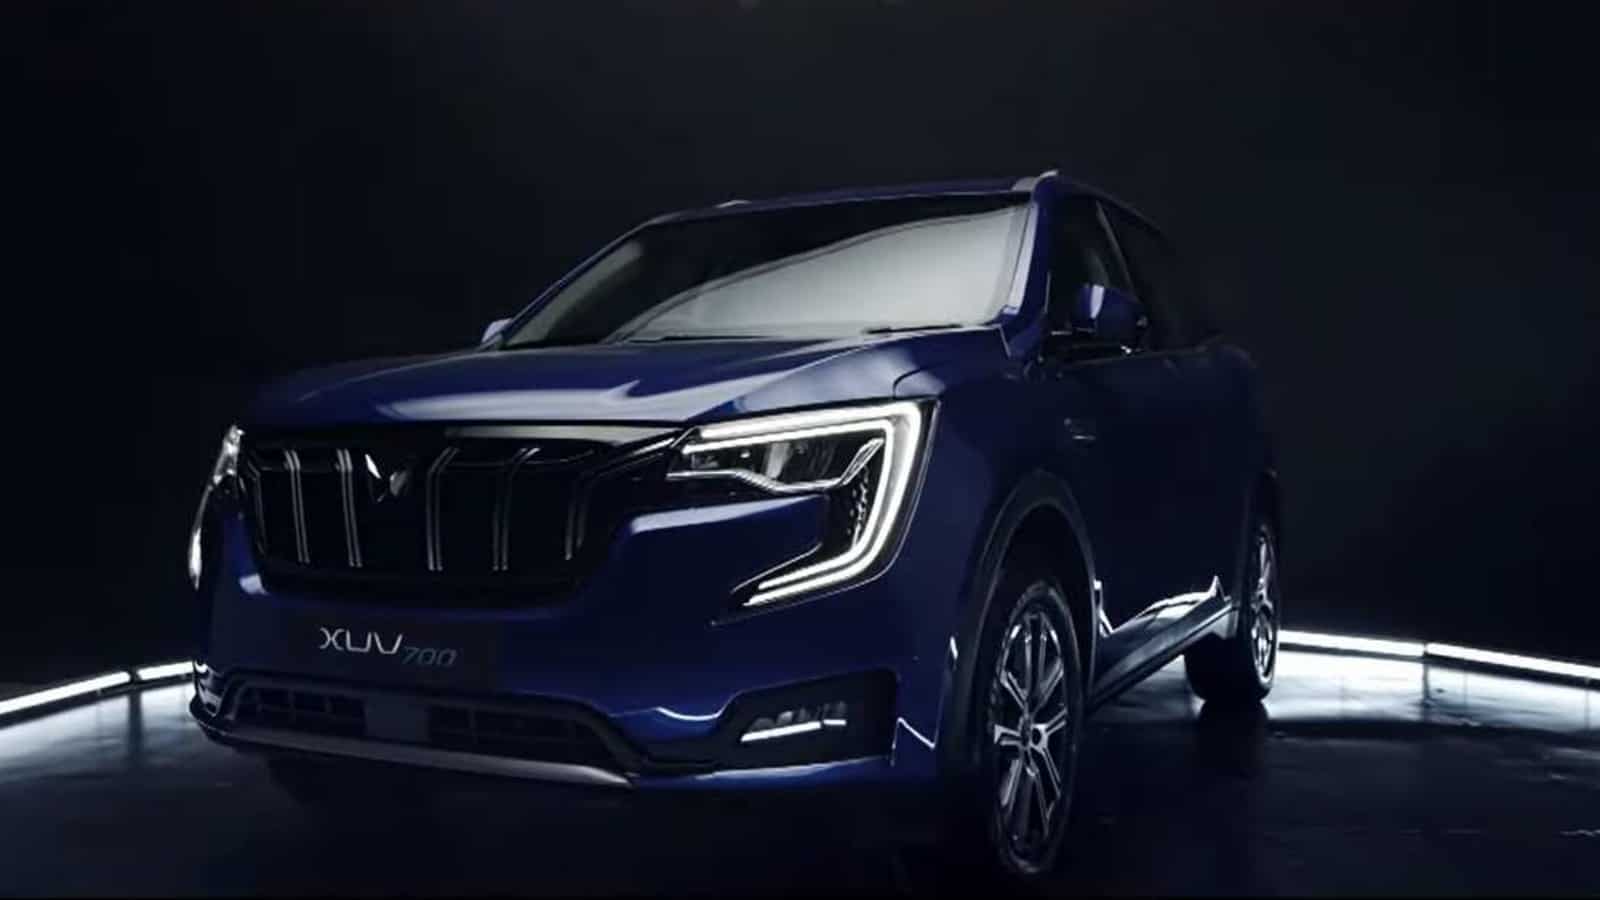 Mahindra XUV700 SUV event highlights. Watch video here